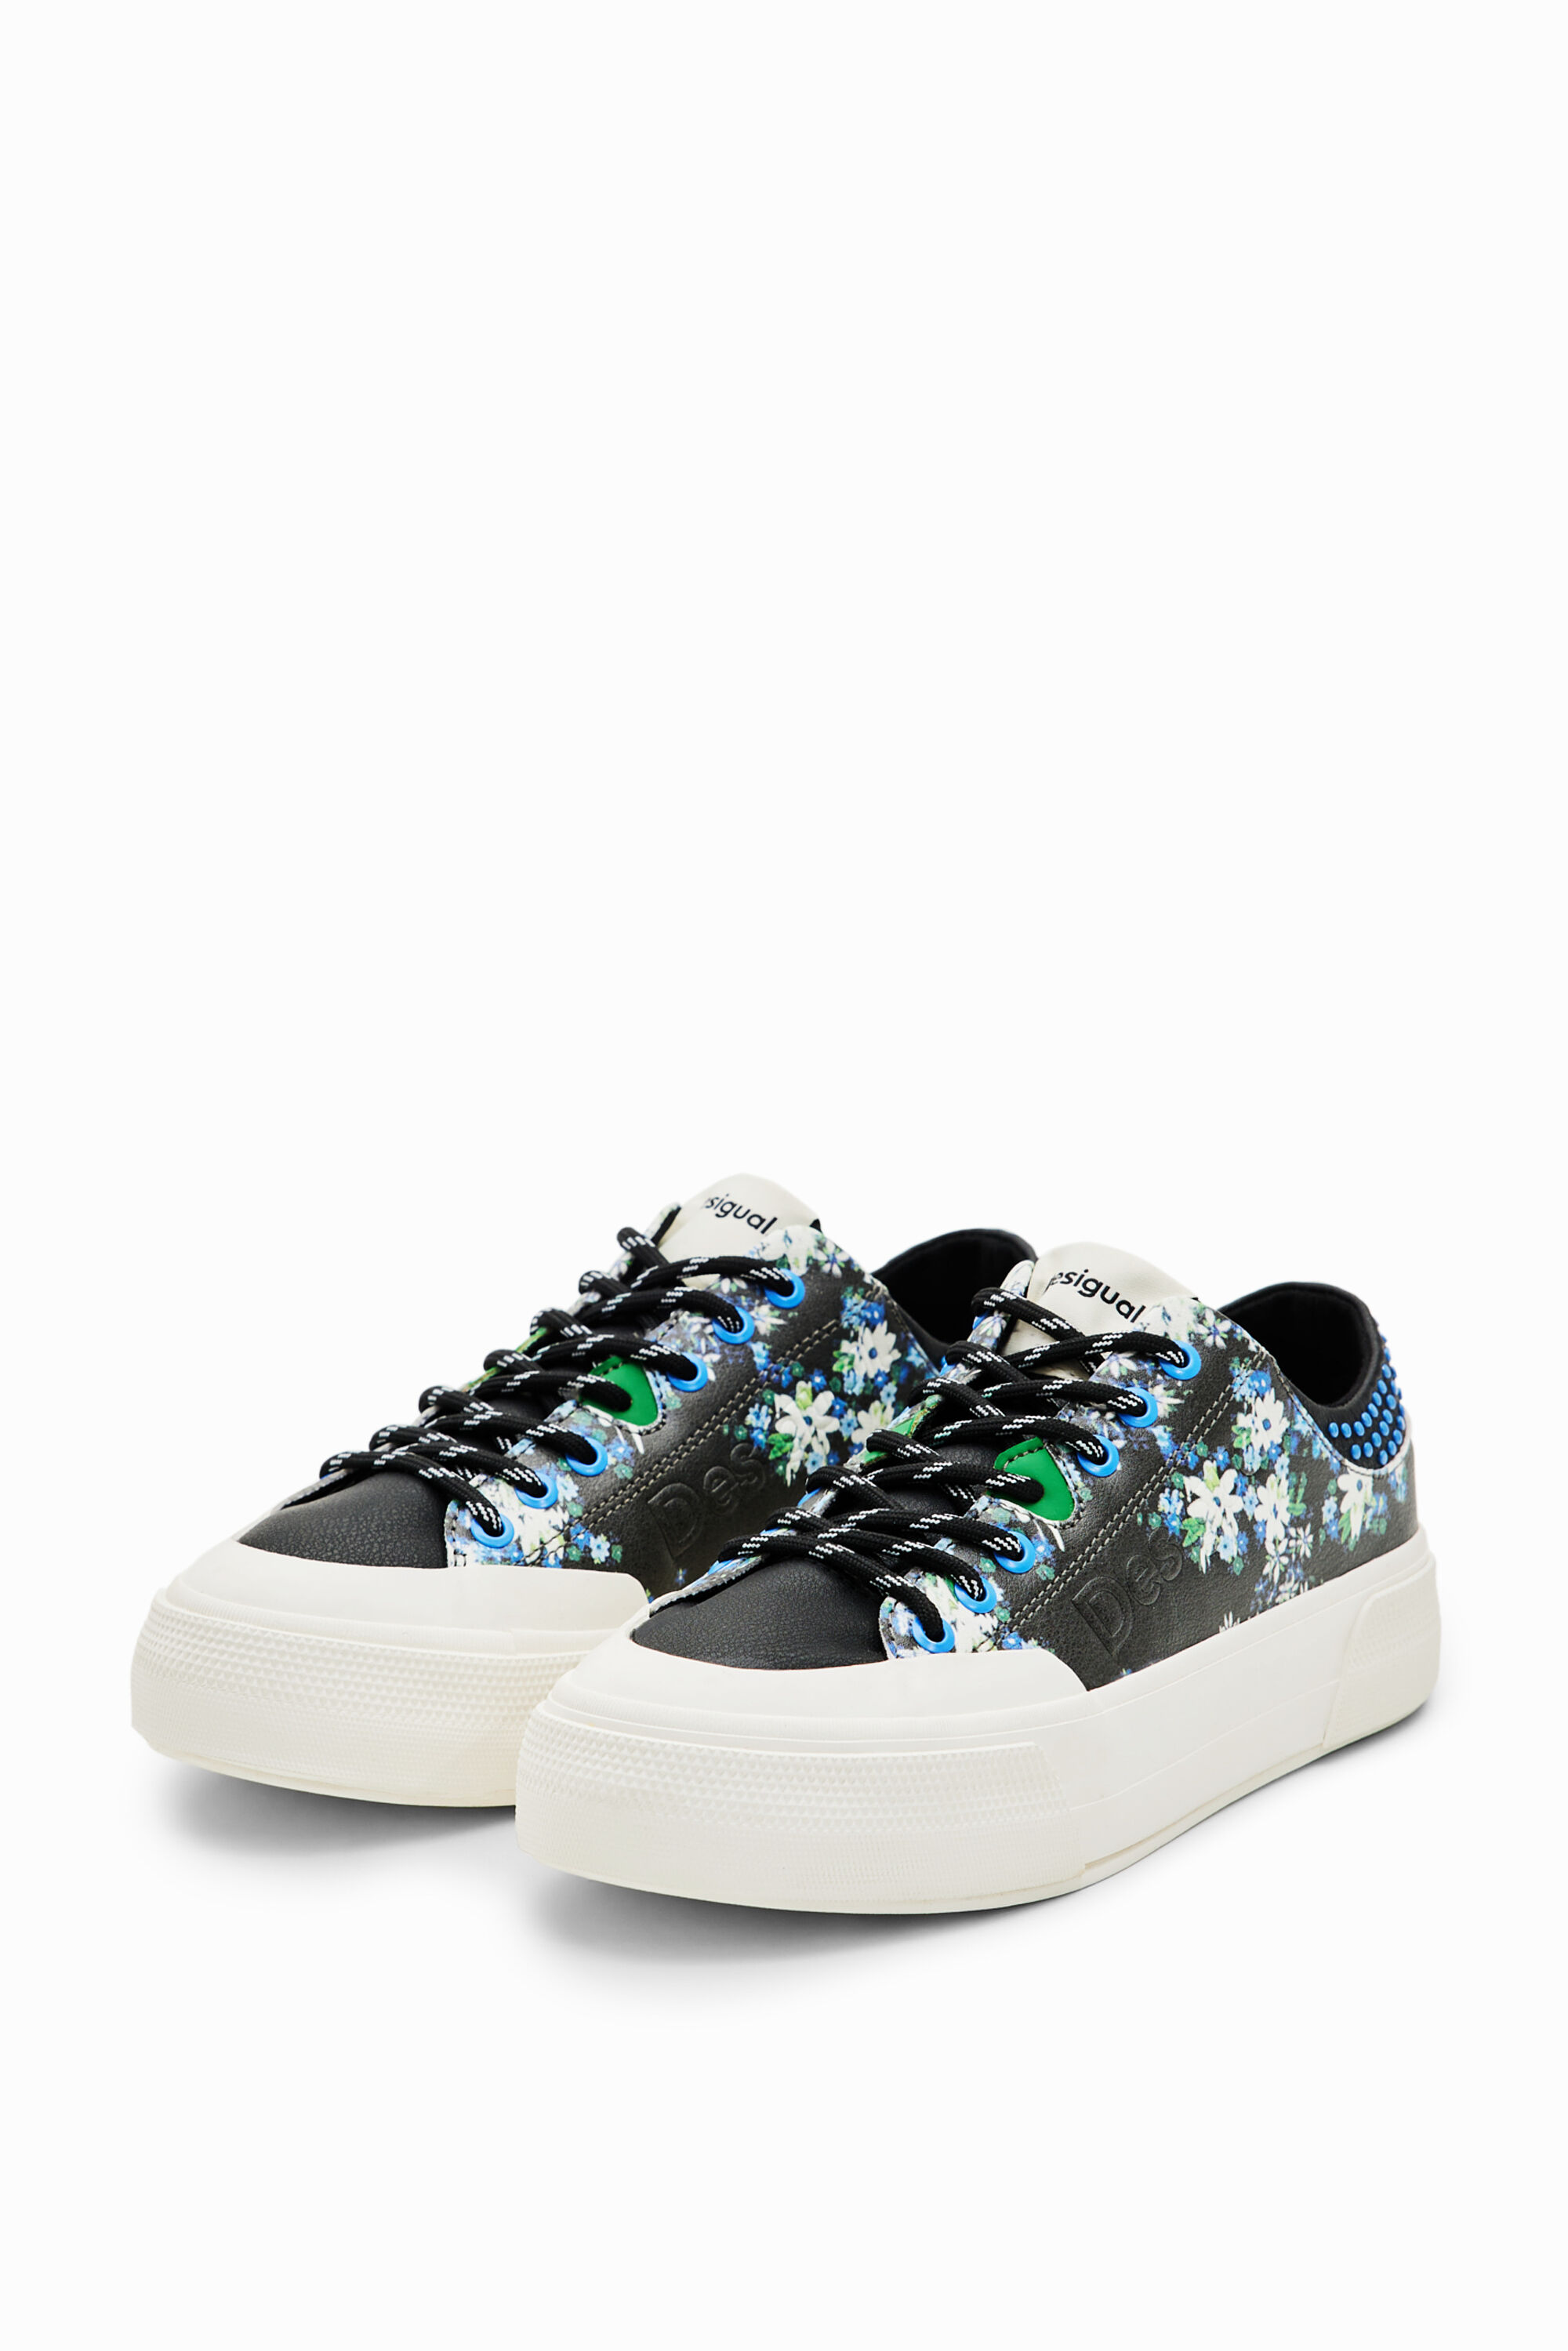 Floral platform sneakers - MATERIAL FINISHES - 38